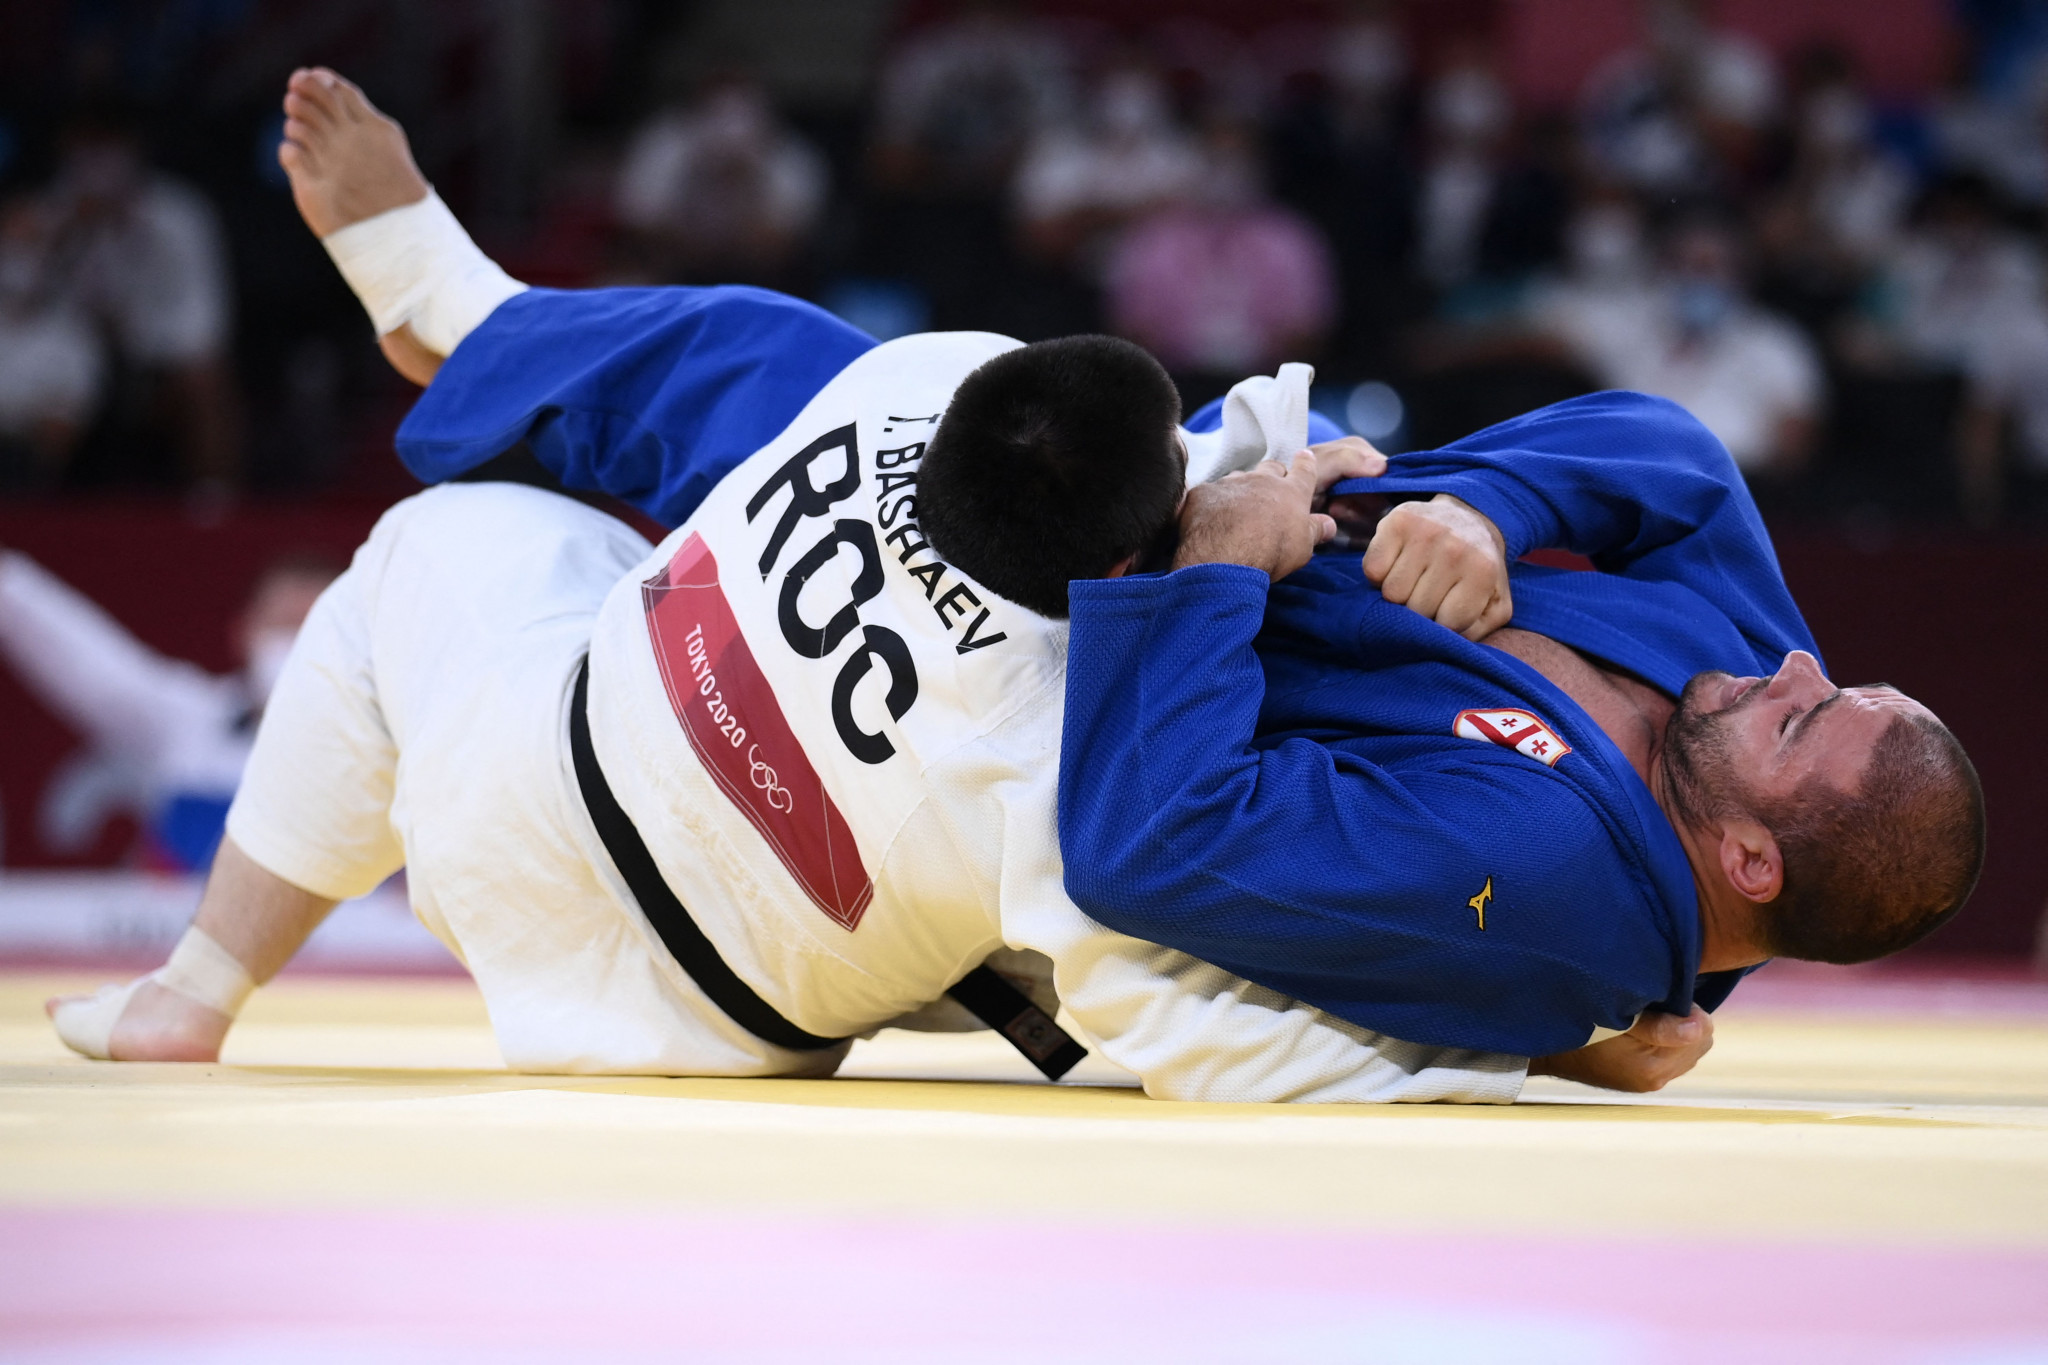 Russian and Belarusian athletes are suspended from IJF competitions until January 2023 ©Getty Images